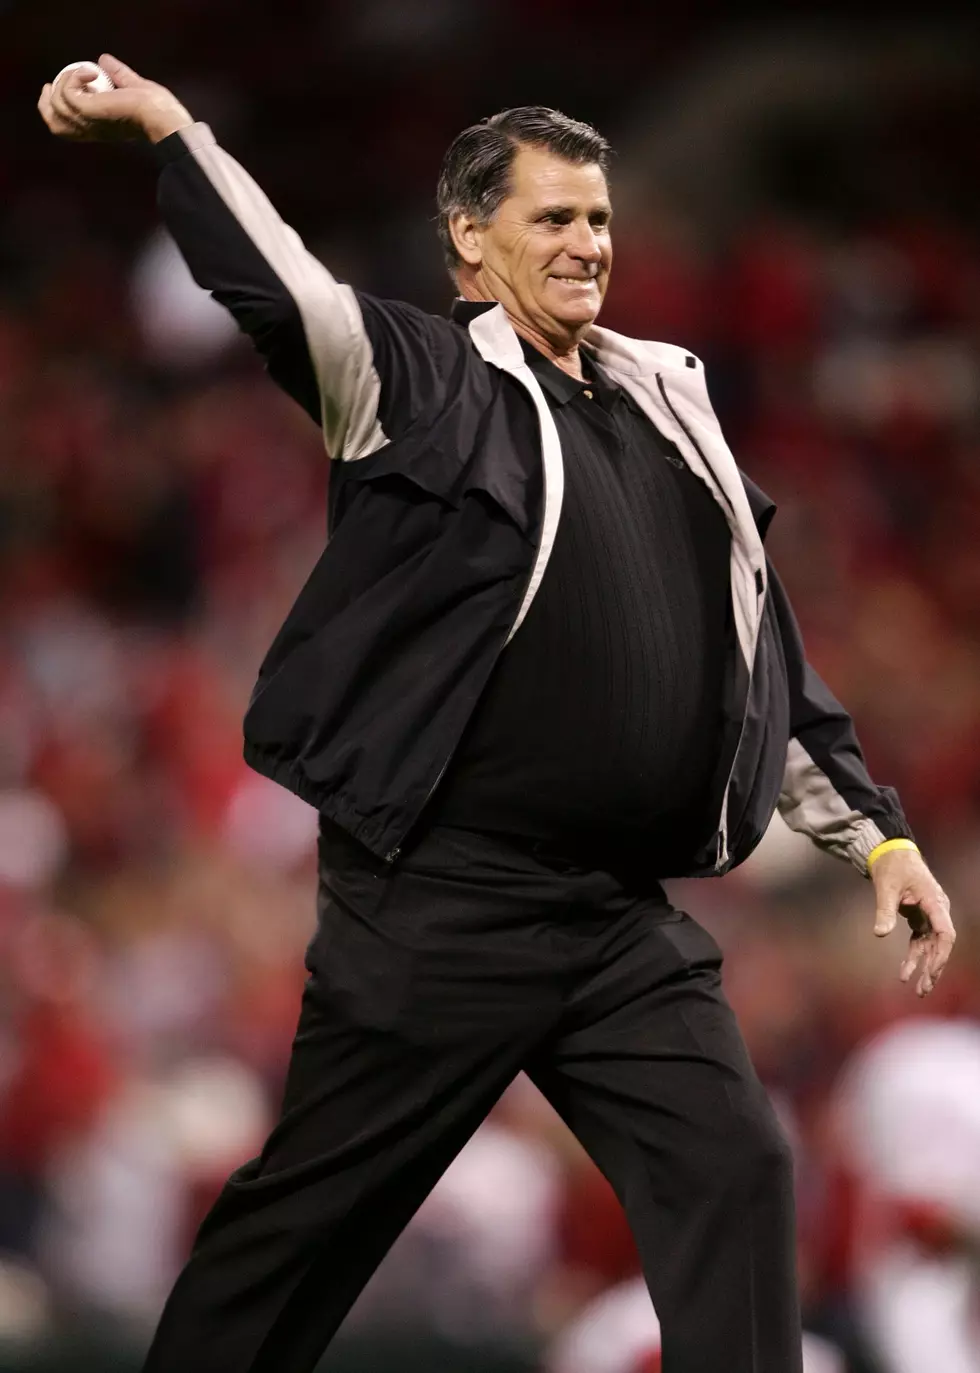 Mike Shannon Inks a Multi Year Contract Extension With the Cardinals